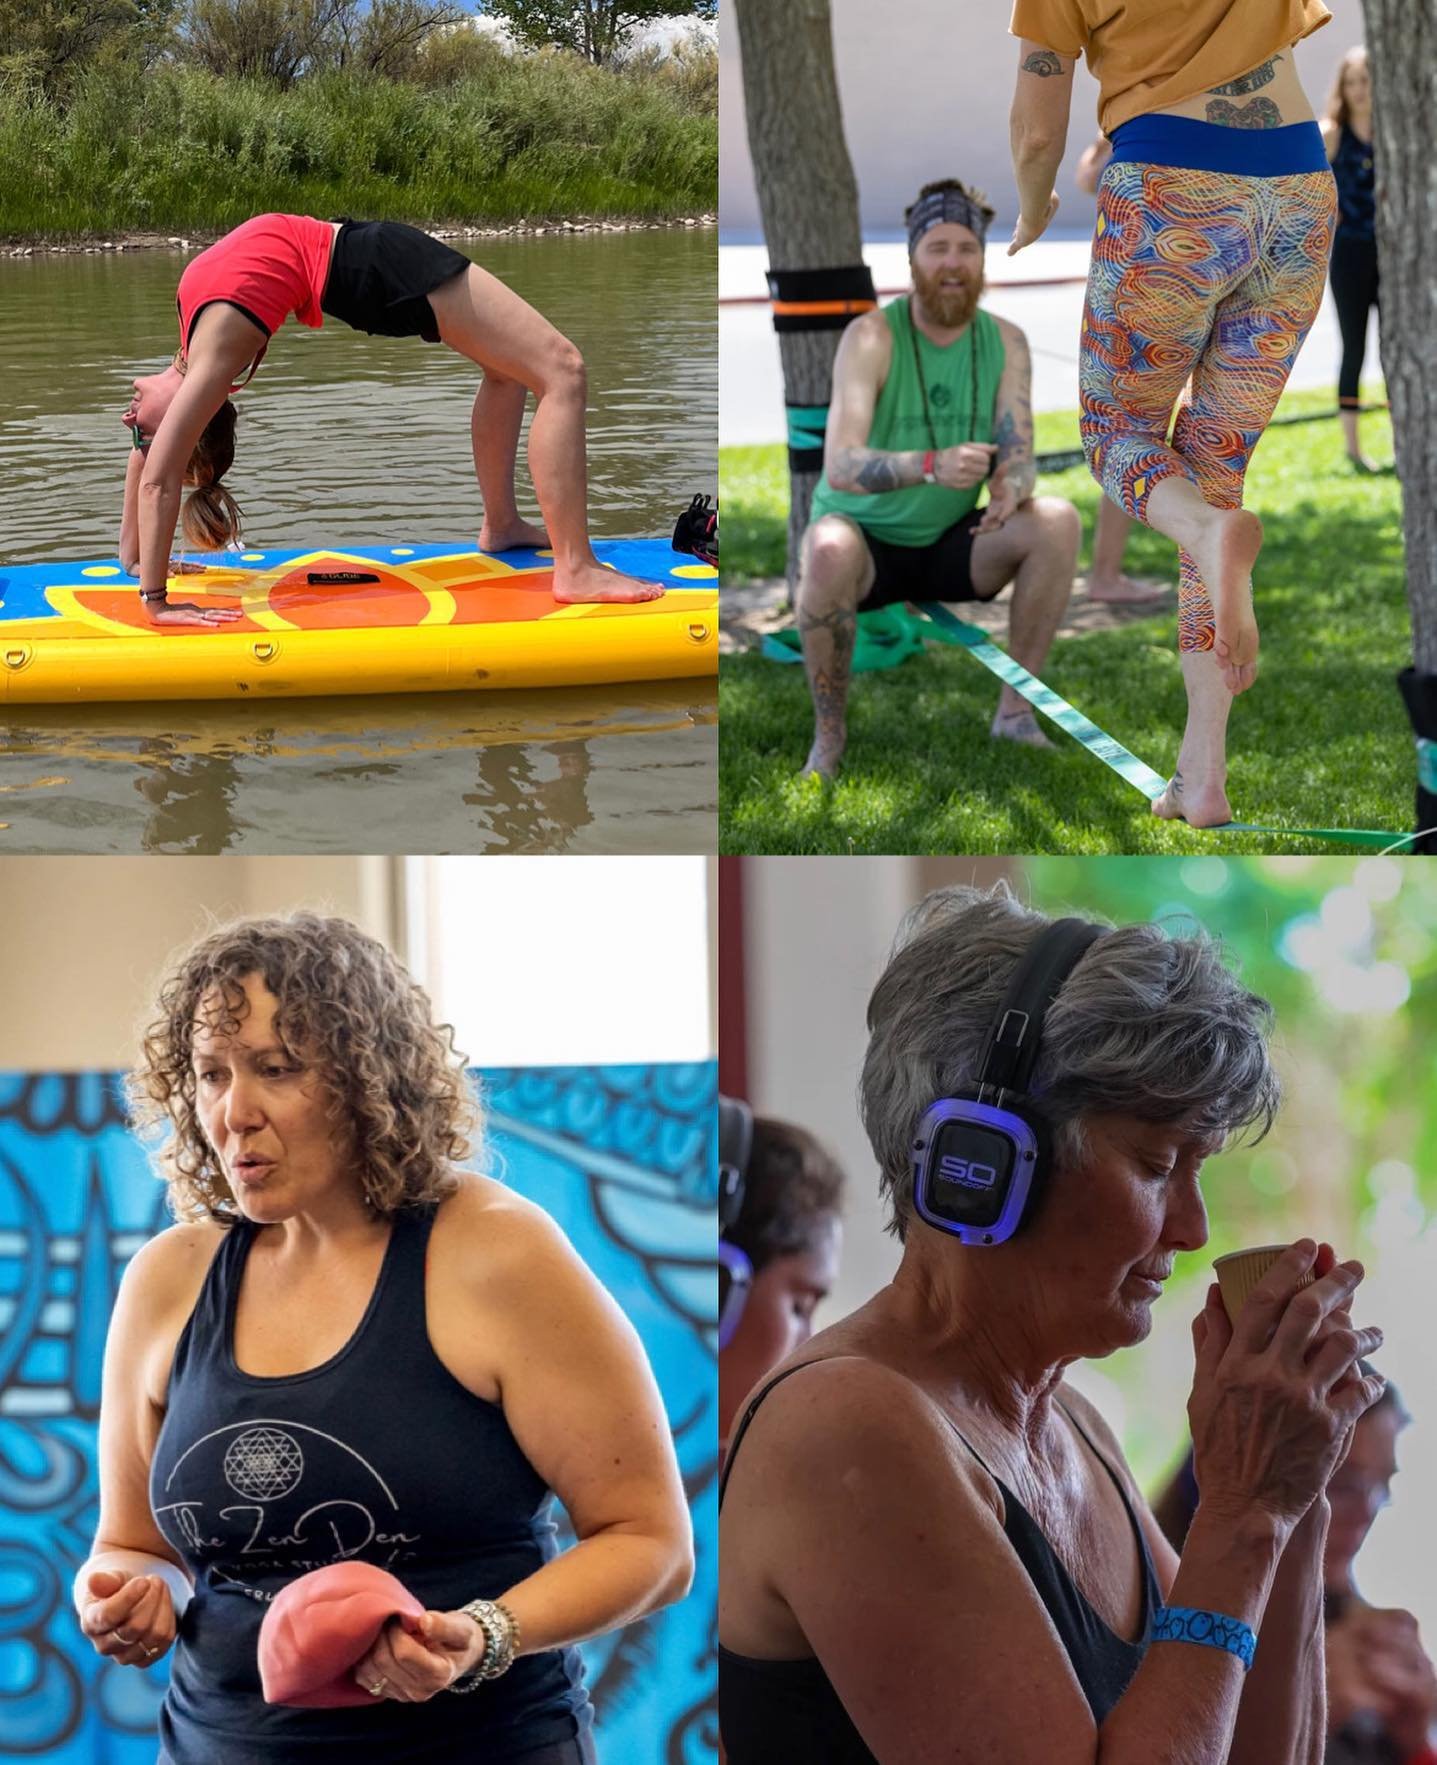 One of the things that we LOVE about the Grand Valley Yoga Fest is offering classes and teachers that attendees normally wouldn&rsquo;t have the opportunity to experience 🧘🏽&zwj;♀️🤸🏼&zwj;♀️✨

This is a weekend for you to explore new classes, try 